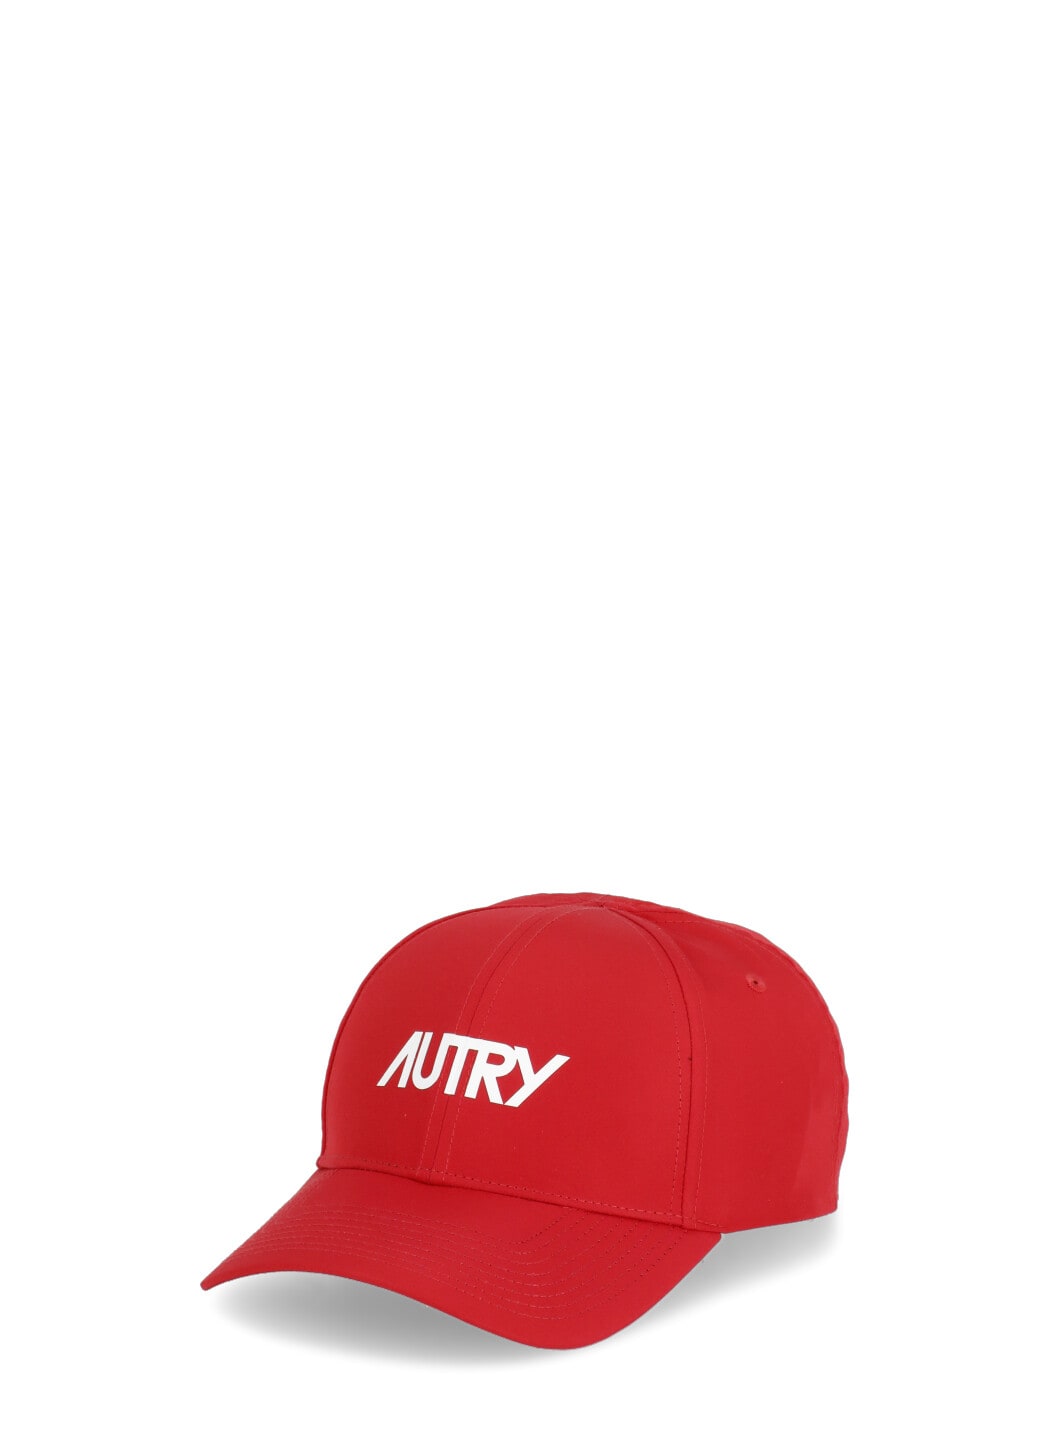 Autry Baseball Hat With Logo In Red